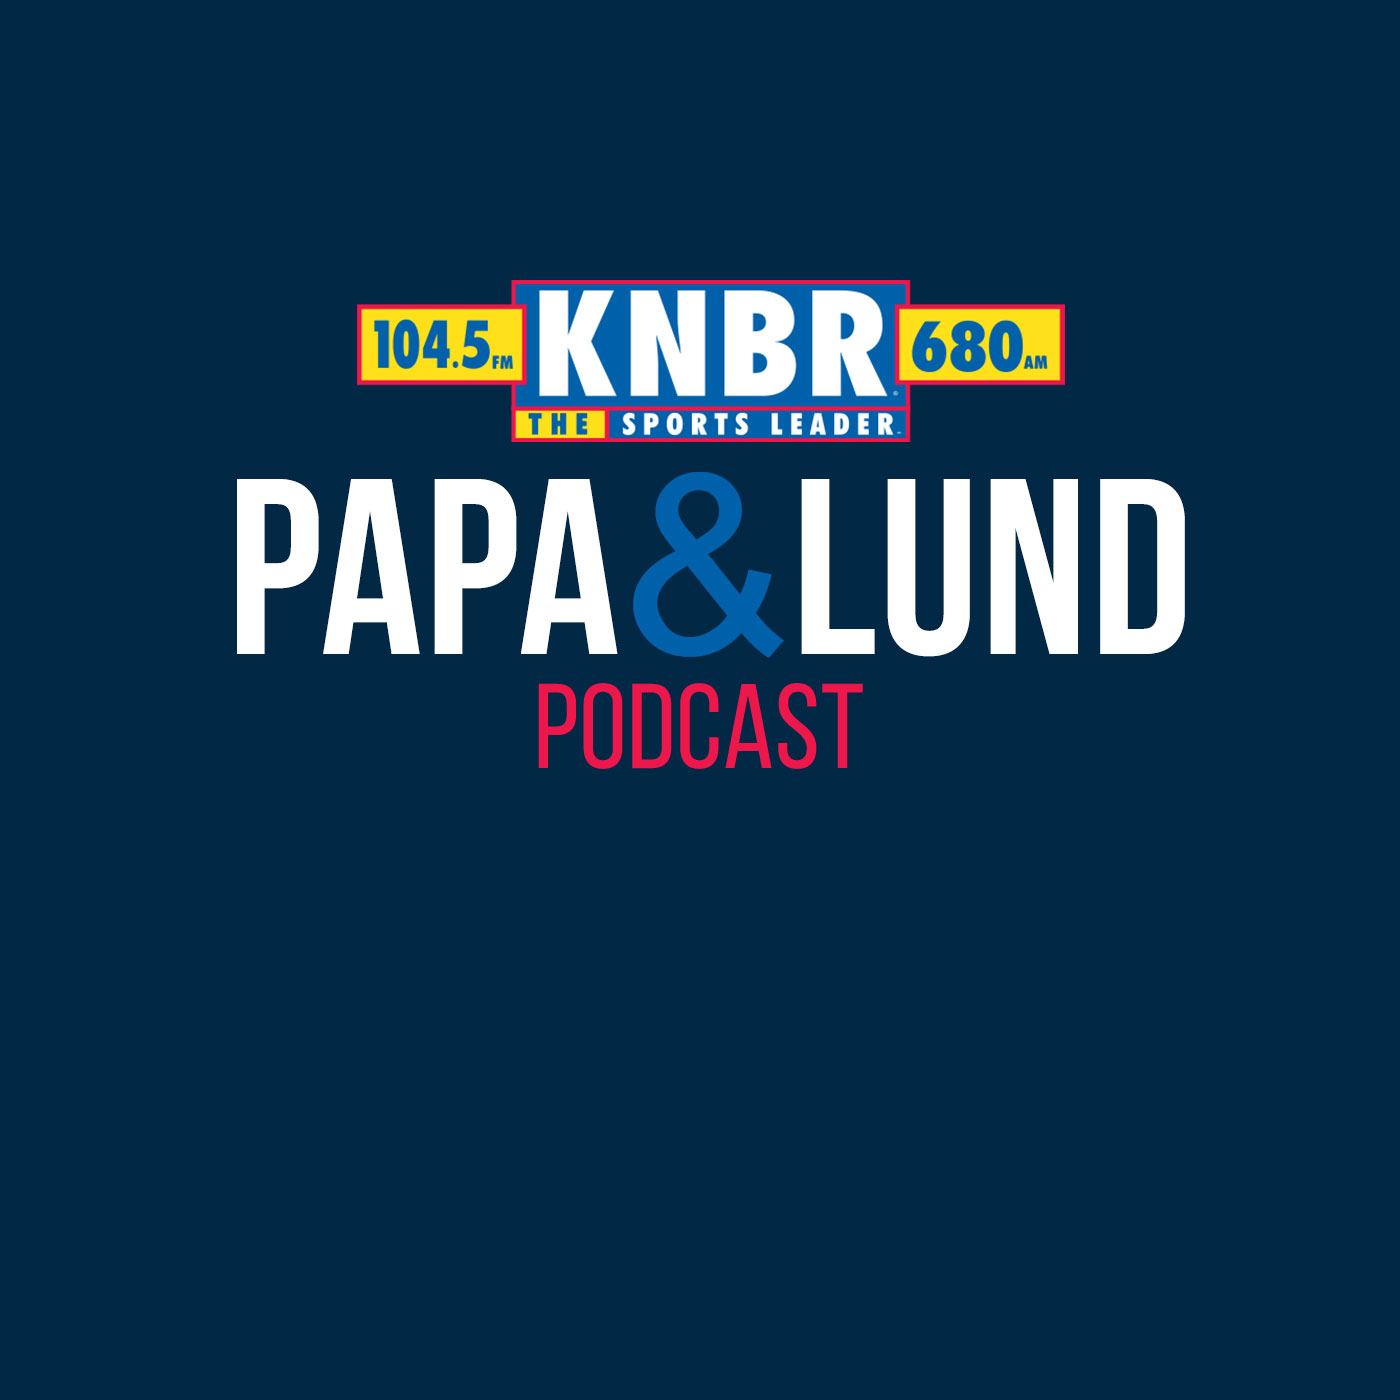 12-12 Brian Anderson joins Papa & Lund to discuss how the Warriors fix their early season issues with ball control and whether or not if this is who the Warriors are now